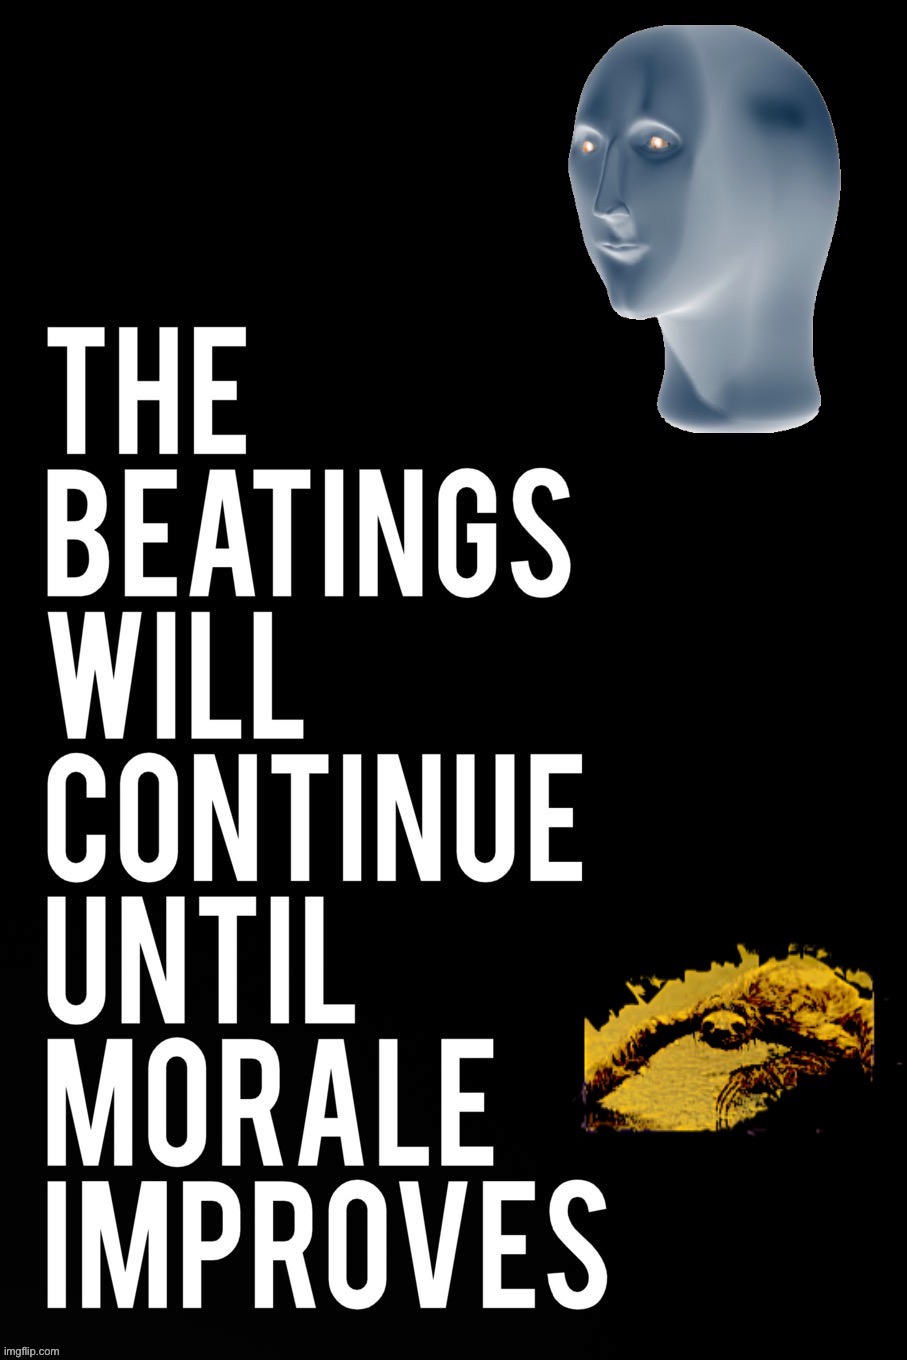 Meme man sloth the beatings will continue until morale improves | image tagged in meme man sloth the beatings will continue until morale improves | made w/ Imgflip meme maker